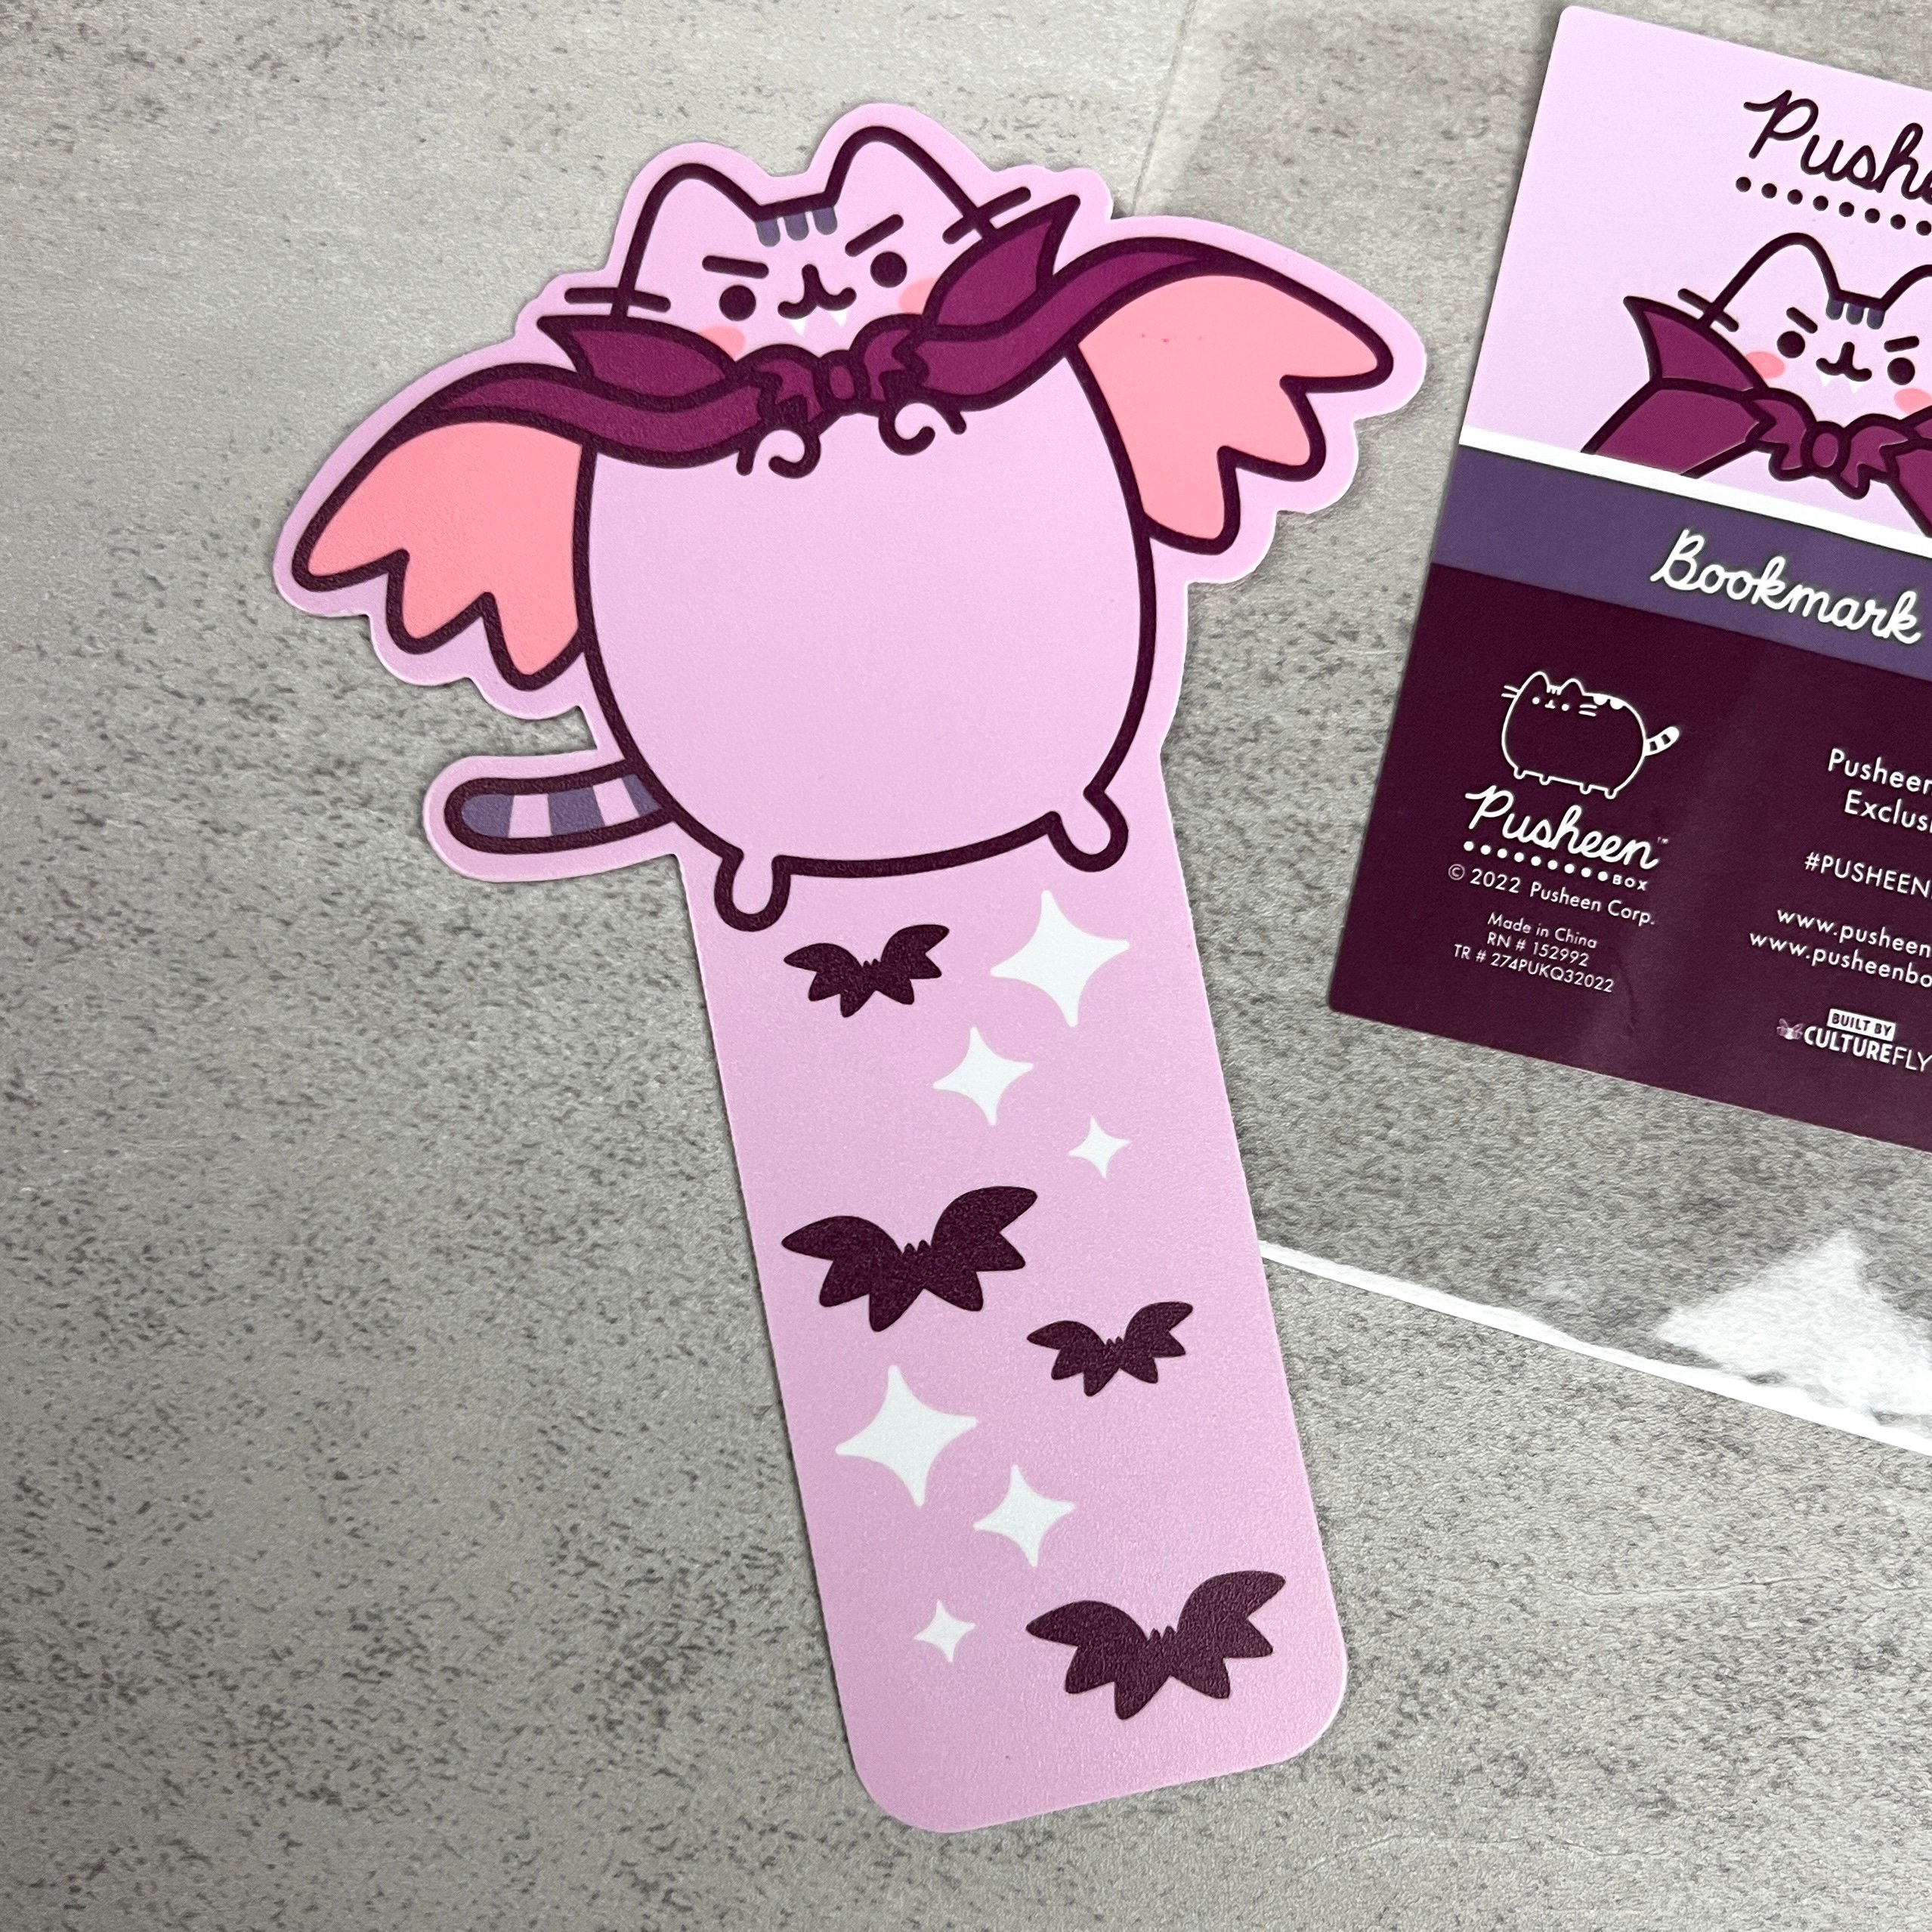 Front of Bookmark for Pusheen Box Fal 2022